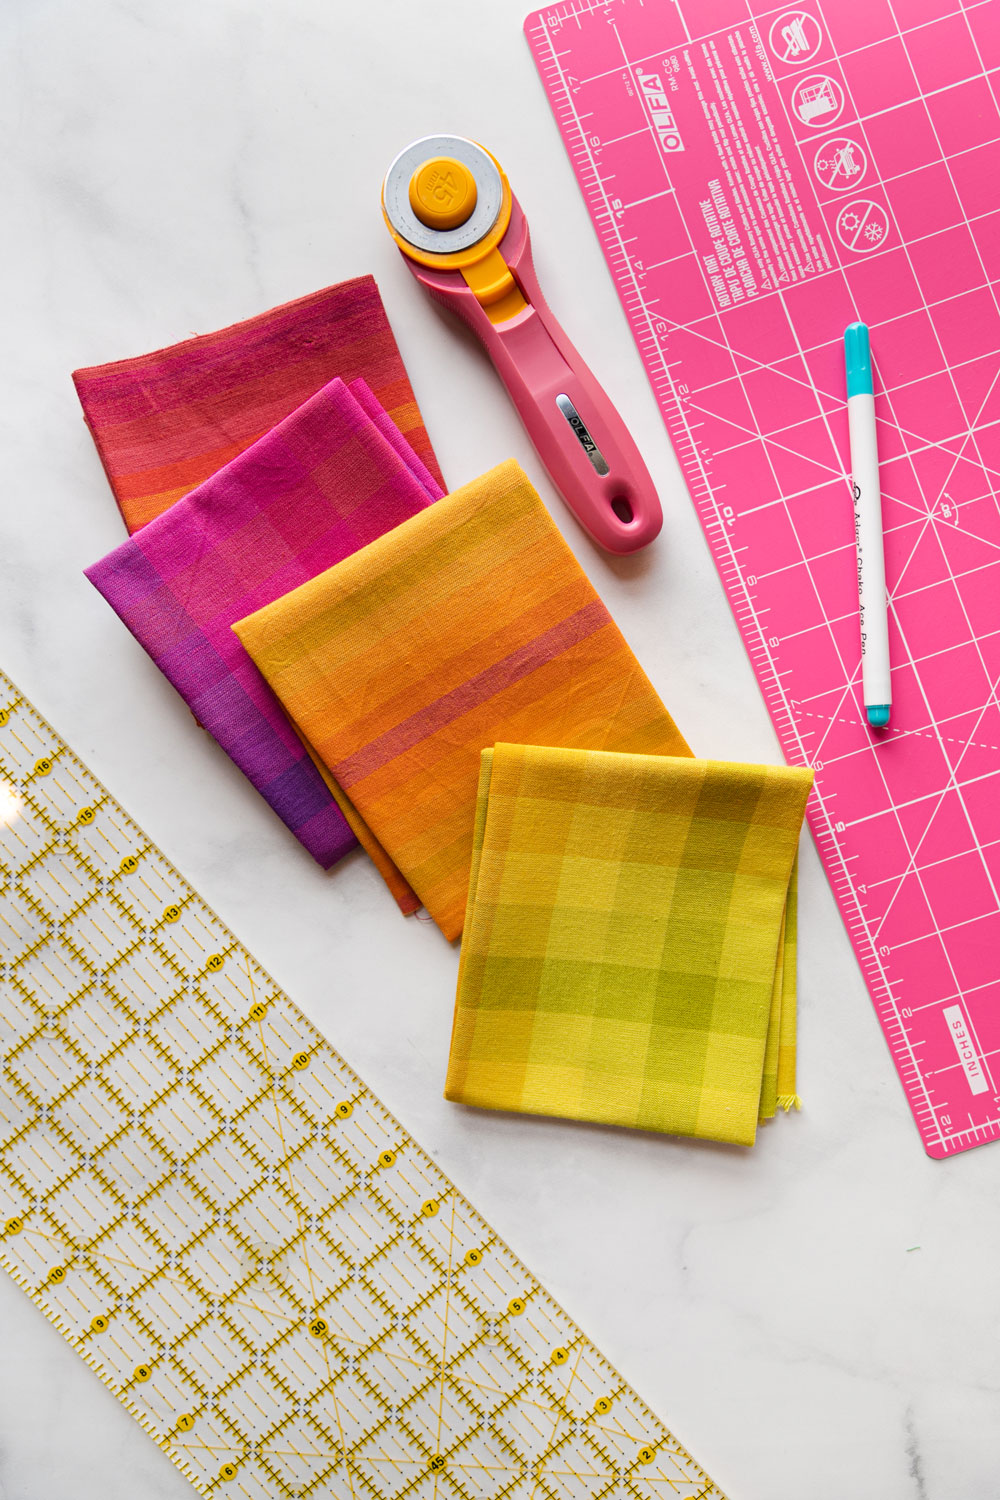 In this free reusable market bag tutorial you only need basic sewing skills and 4 fat quarters of fabric. This sewing DIY is great for kids too! suzyquilts.com #DIYbag #beginnersewing #fatquarter